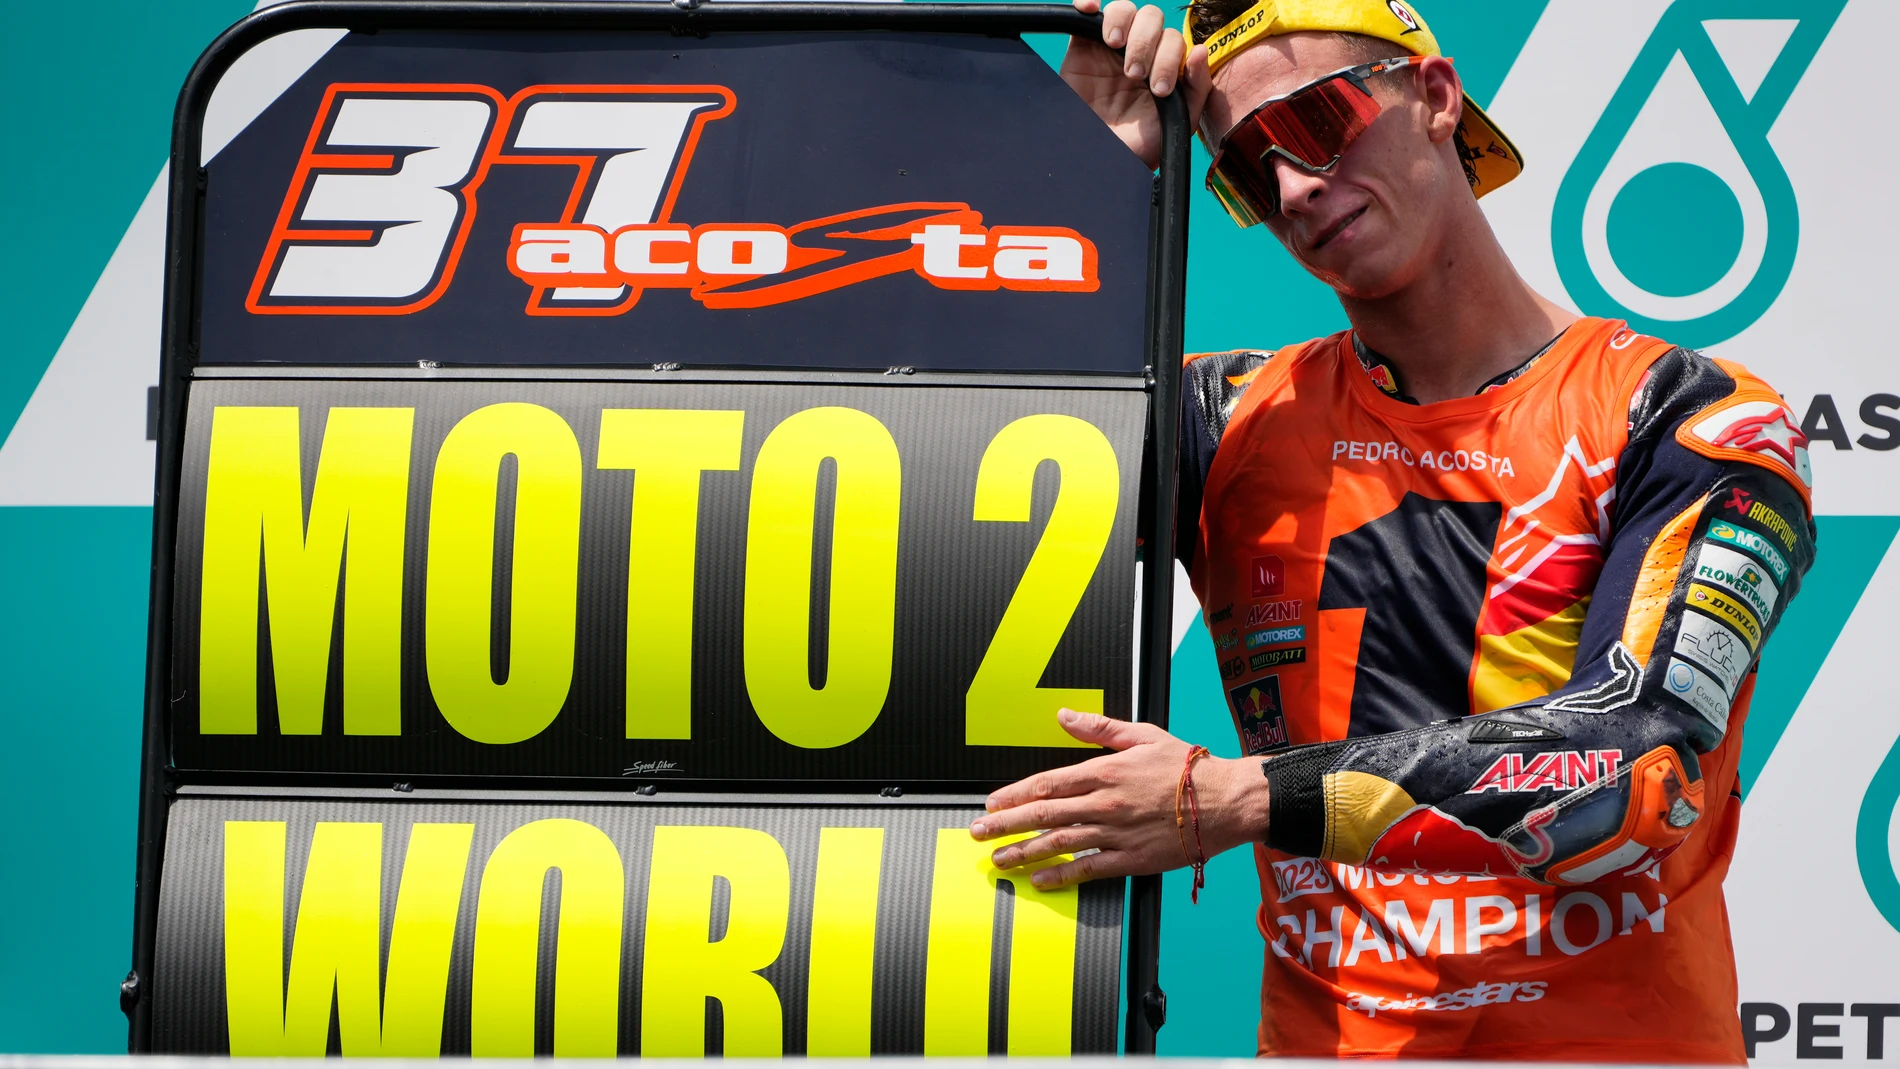 Spanish rider Pedro Acosta celebrates as he secured his 2023 Moto2 World Championship title after the Moto2 class race of the MotoGP Malaysian Grand Prix at the Sepang, Malaysia Sunday, Nov. 12, 2023. (AP Photo/Vincent Thian)